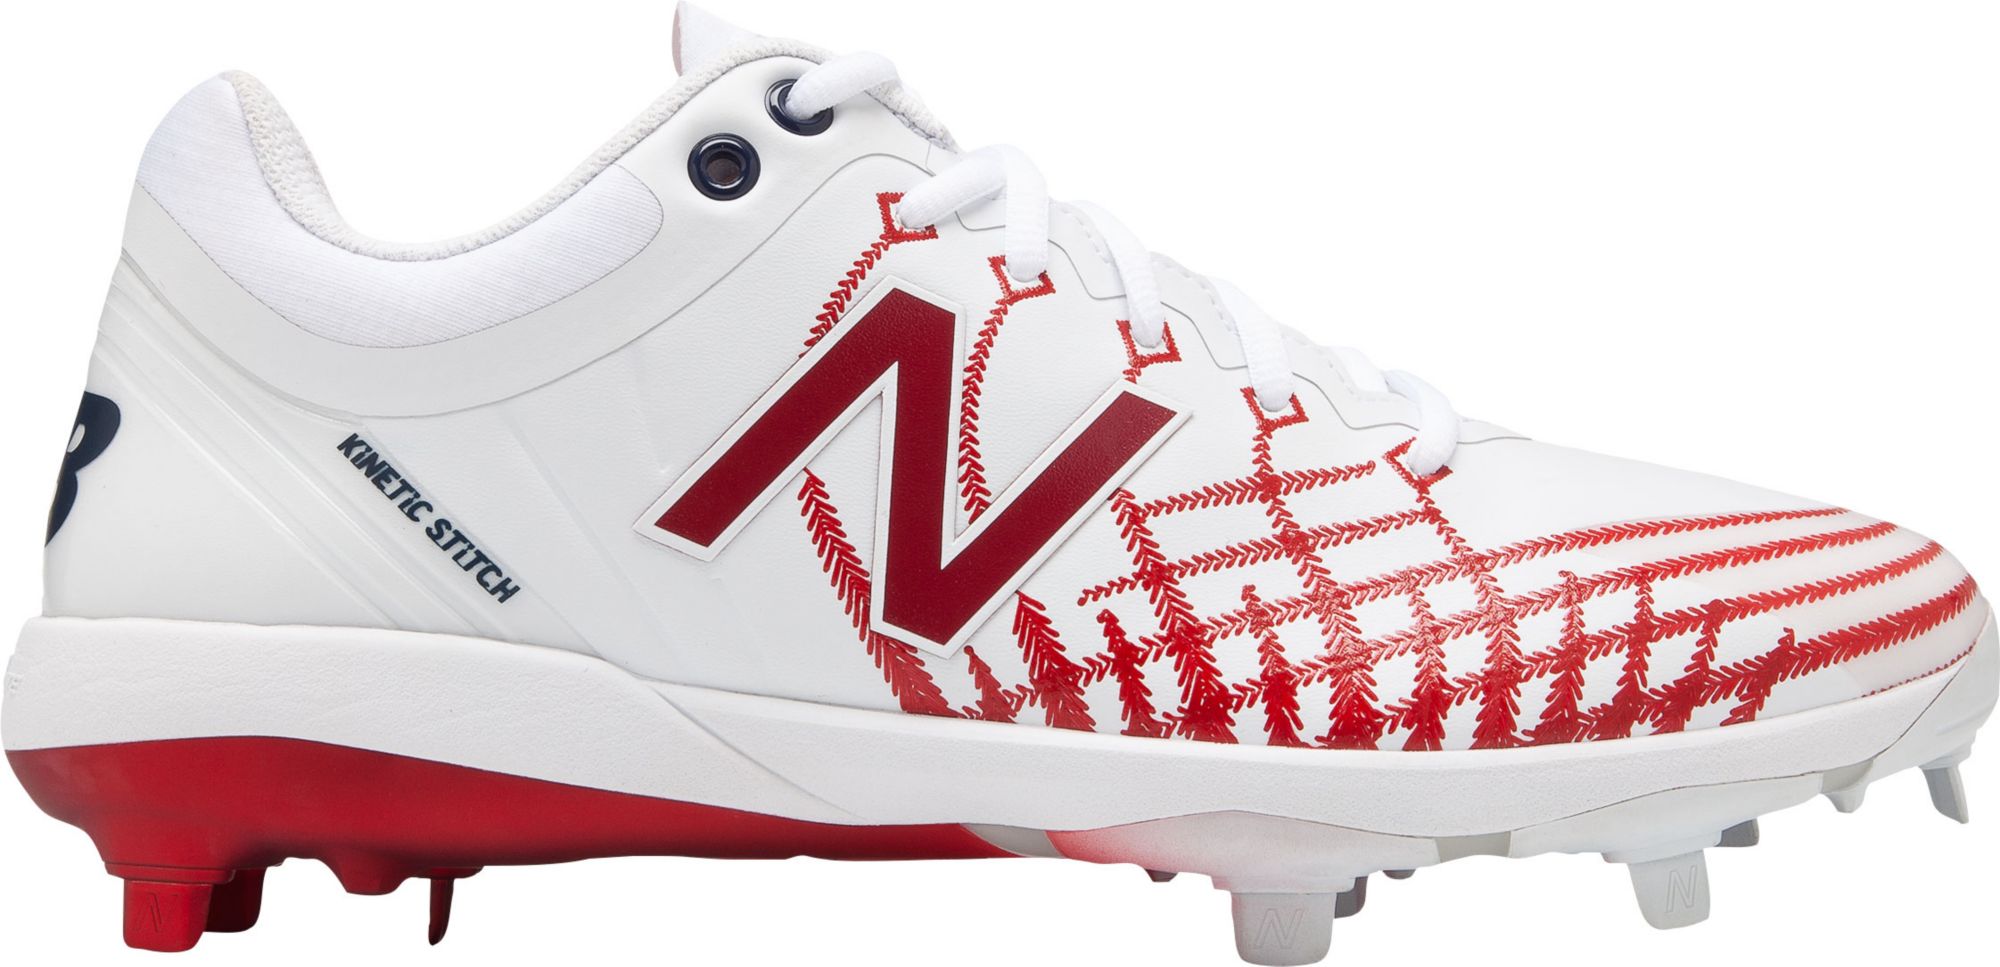 new balance red and white cleats 